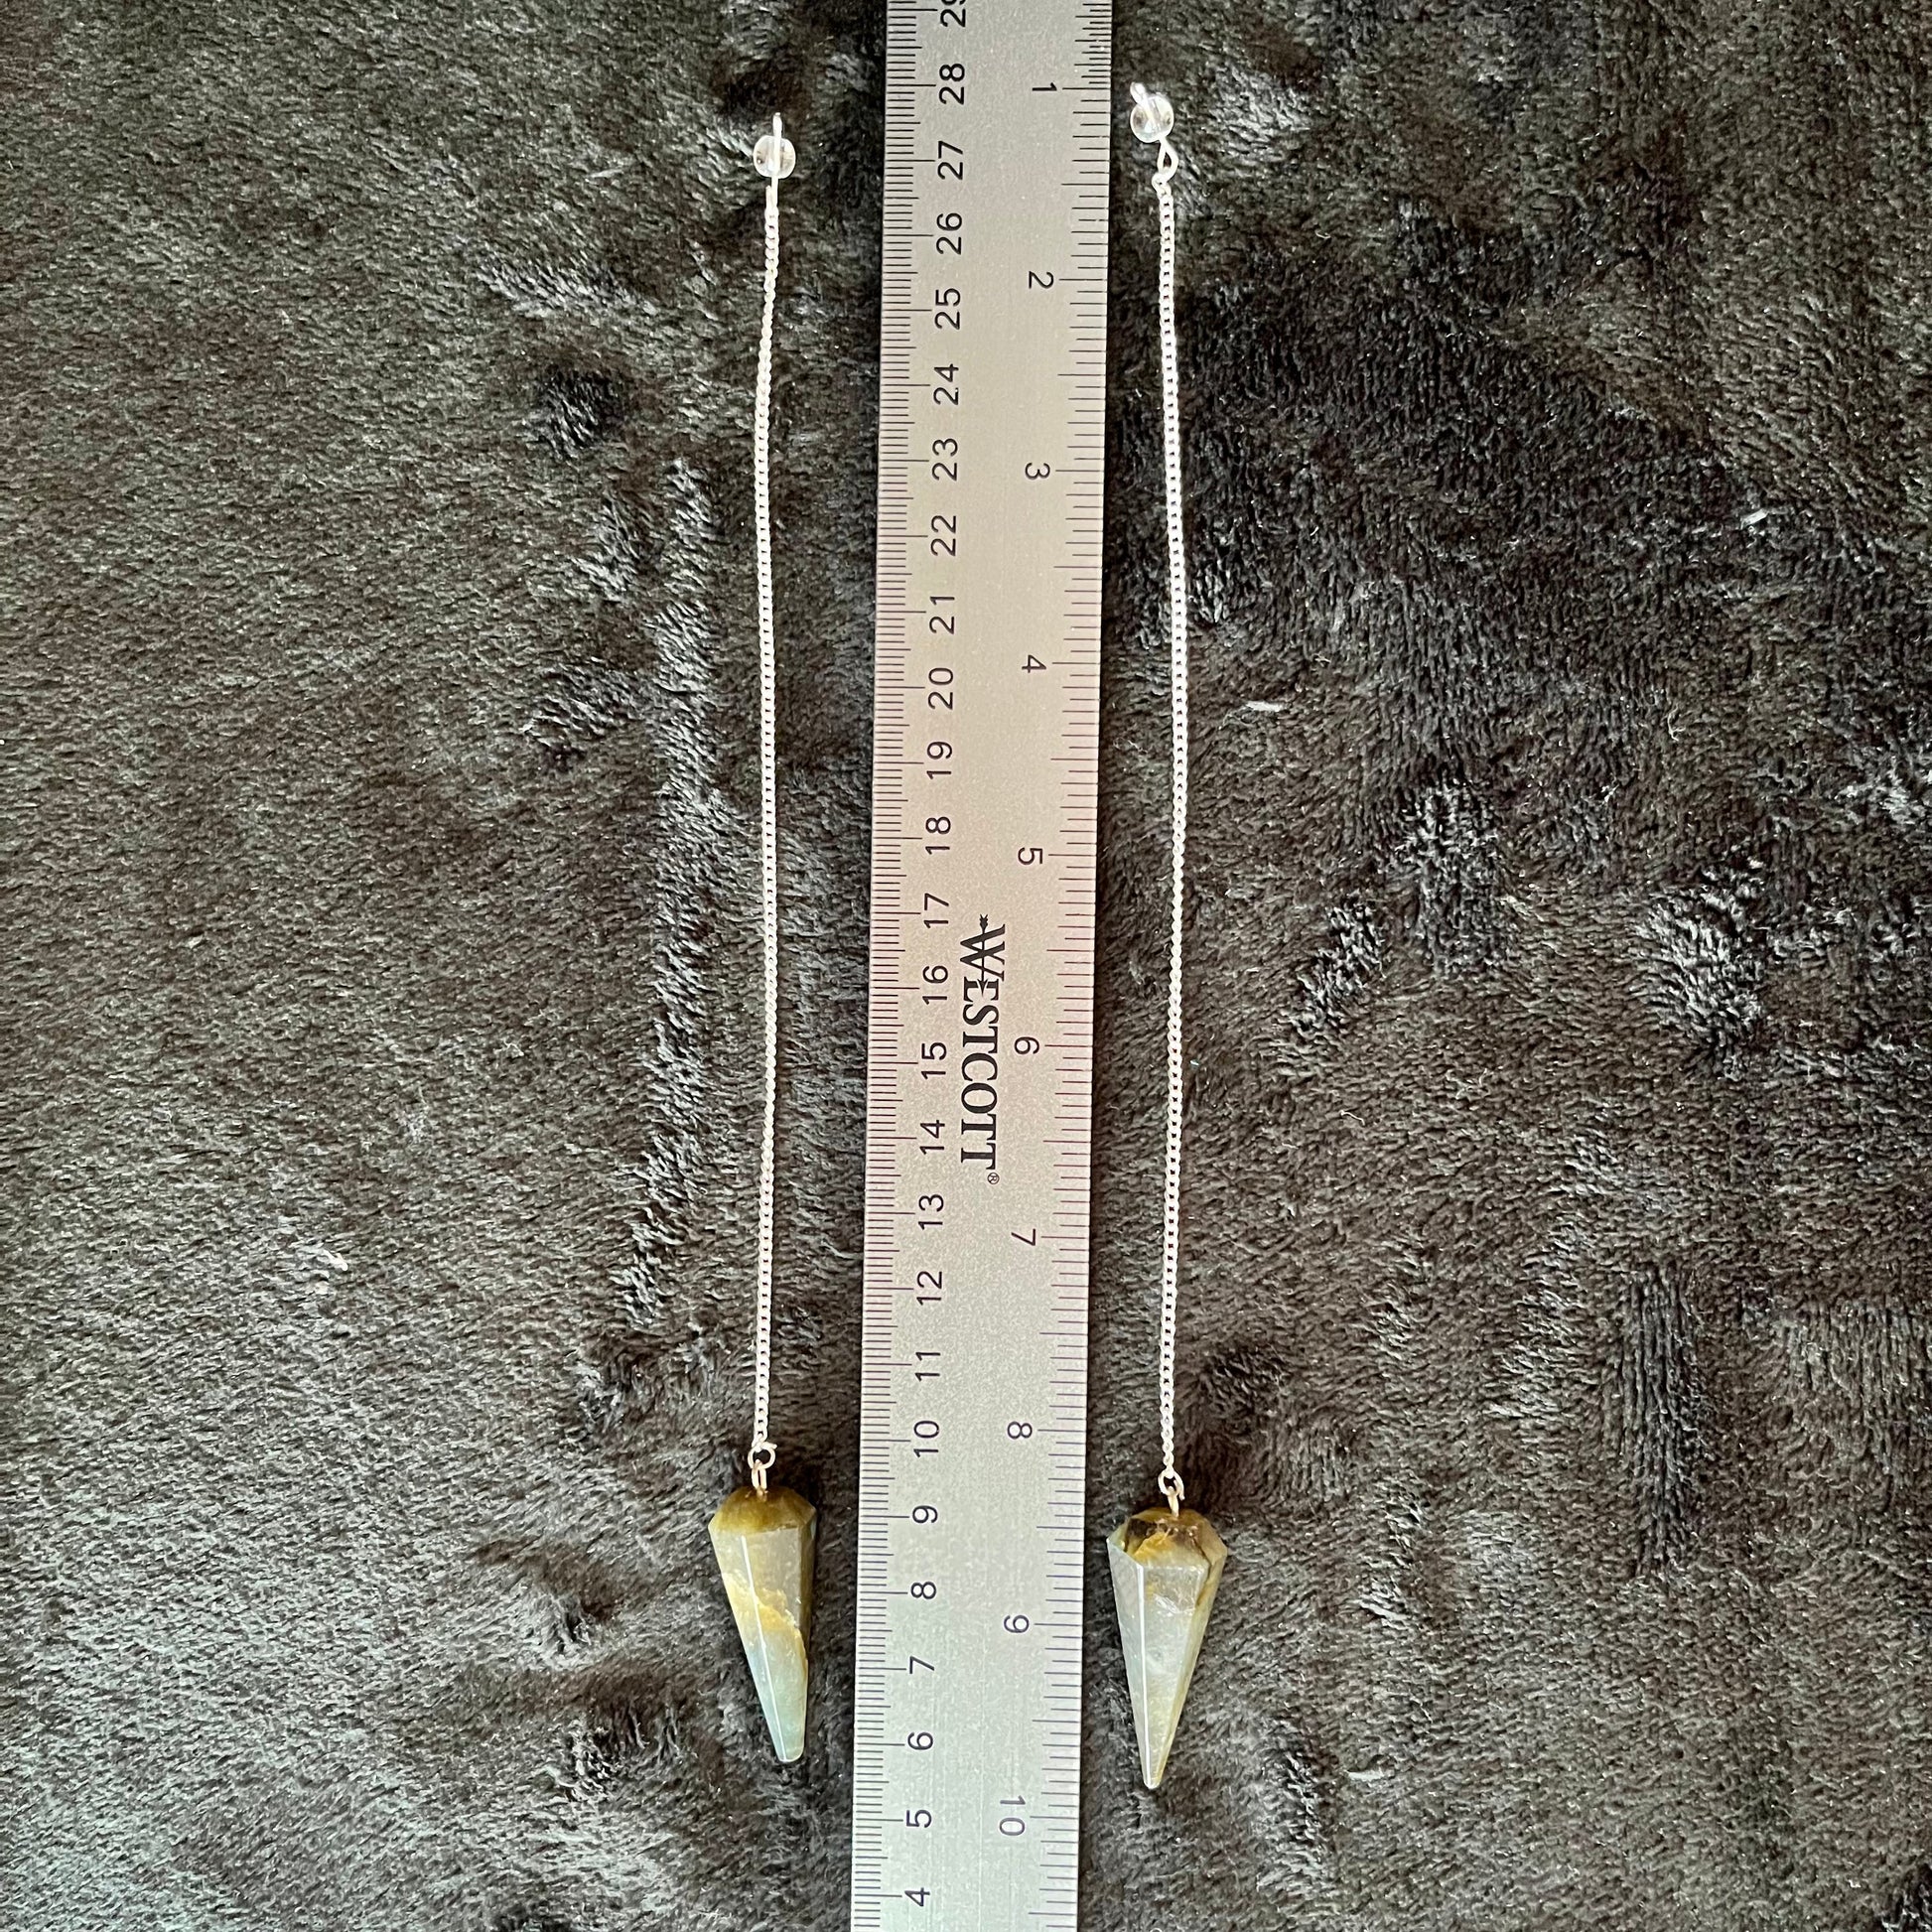 1 1/2 inch Labradorite crystal point pendulum attatched to an 8 inch silve chain, displayed next to a ruler to show size